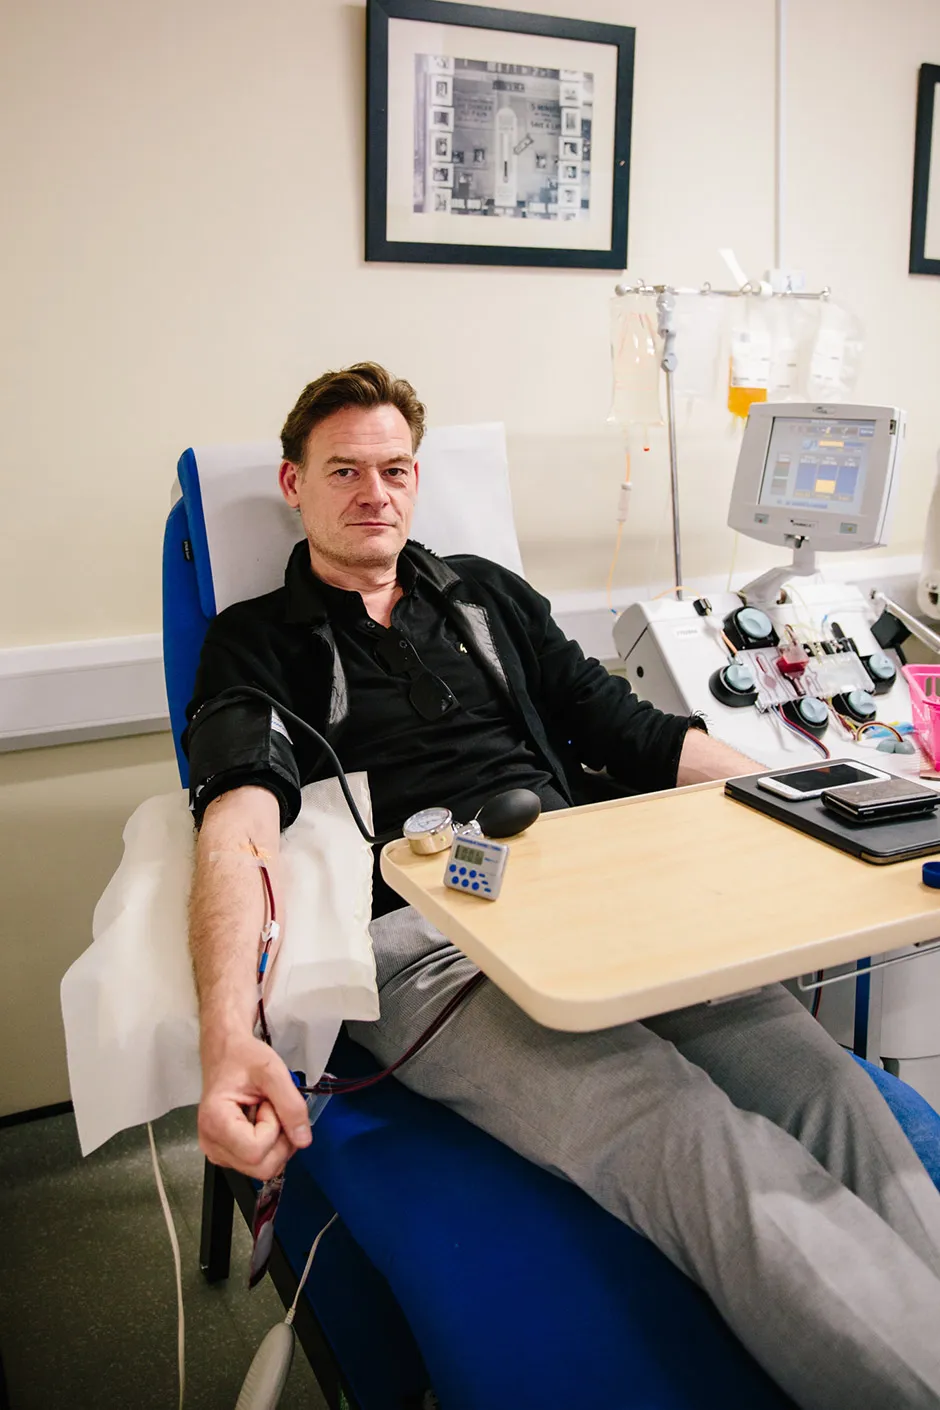 Recovered coronavirus patient Douglas James donating convalescent plasma by plasmapheresis at Tooting Blood Donor Centre, London © Kirsty Hamilton/NHSBT/PA